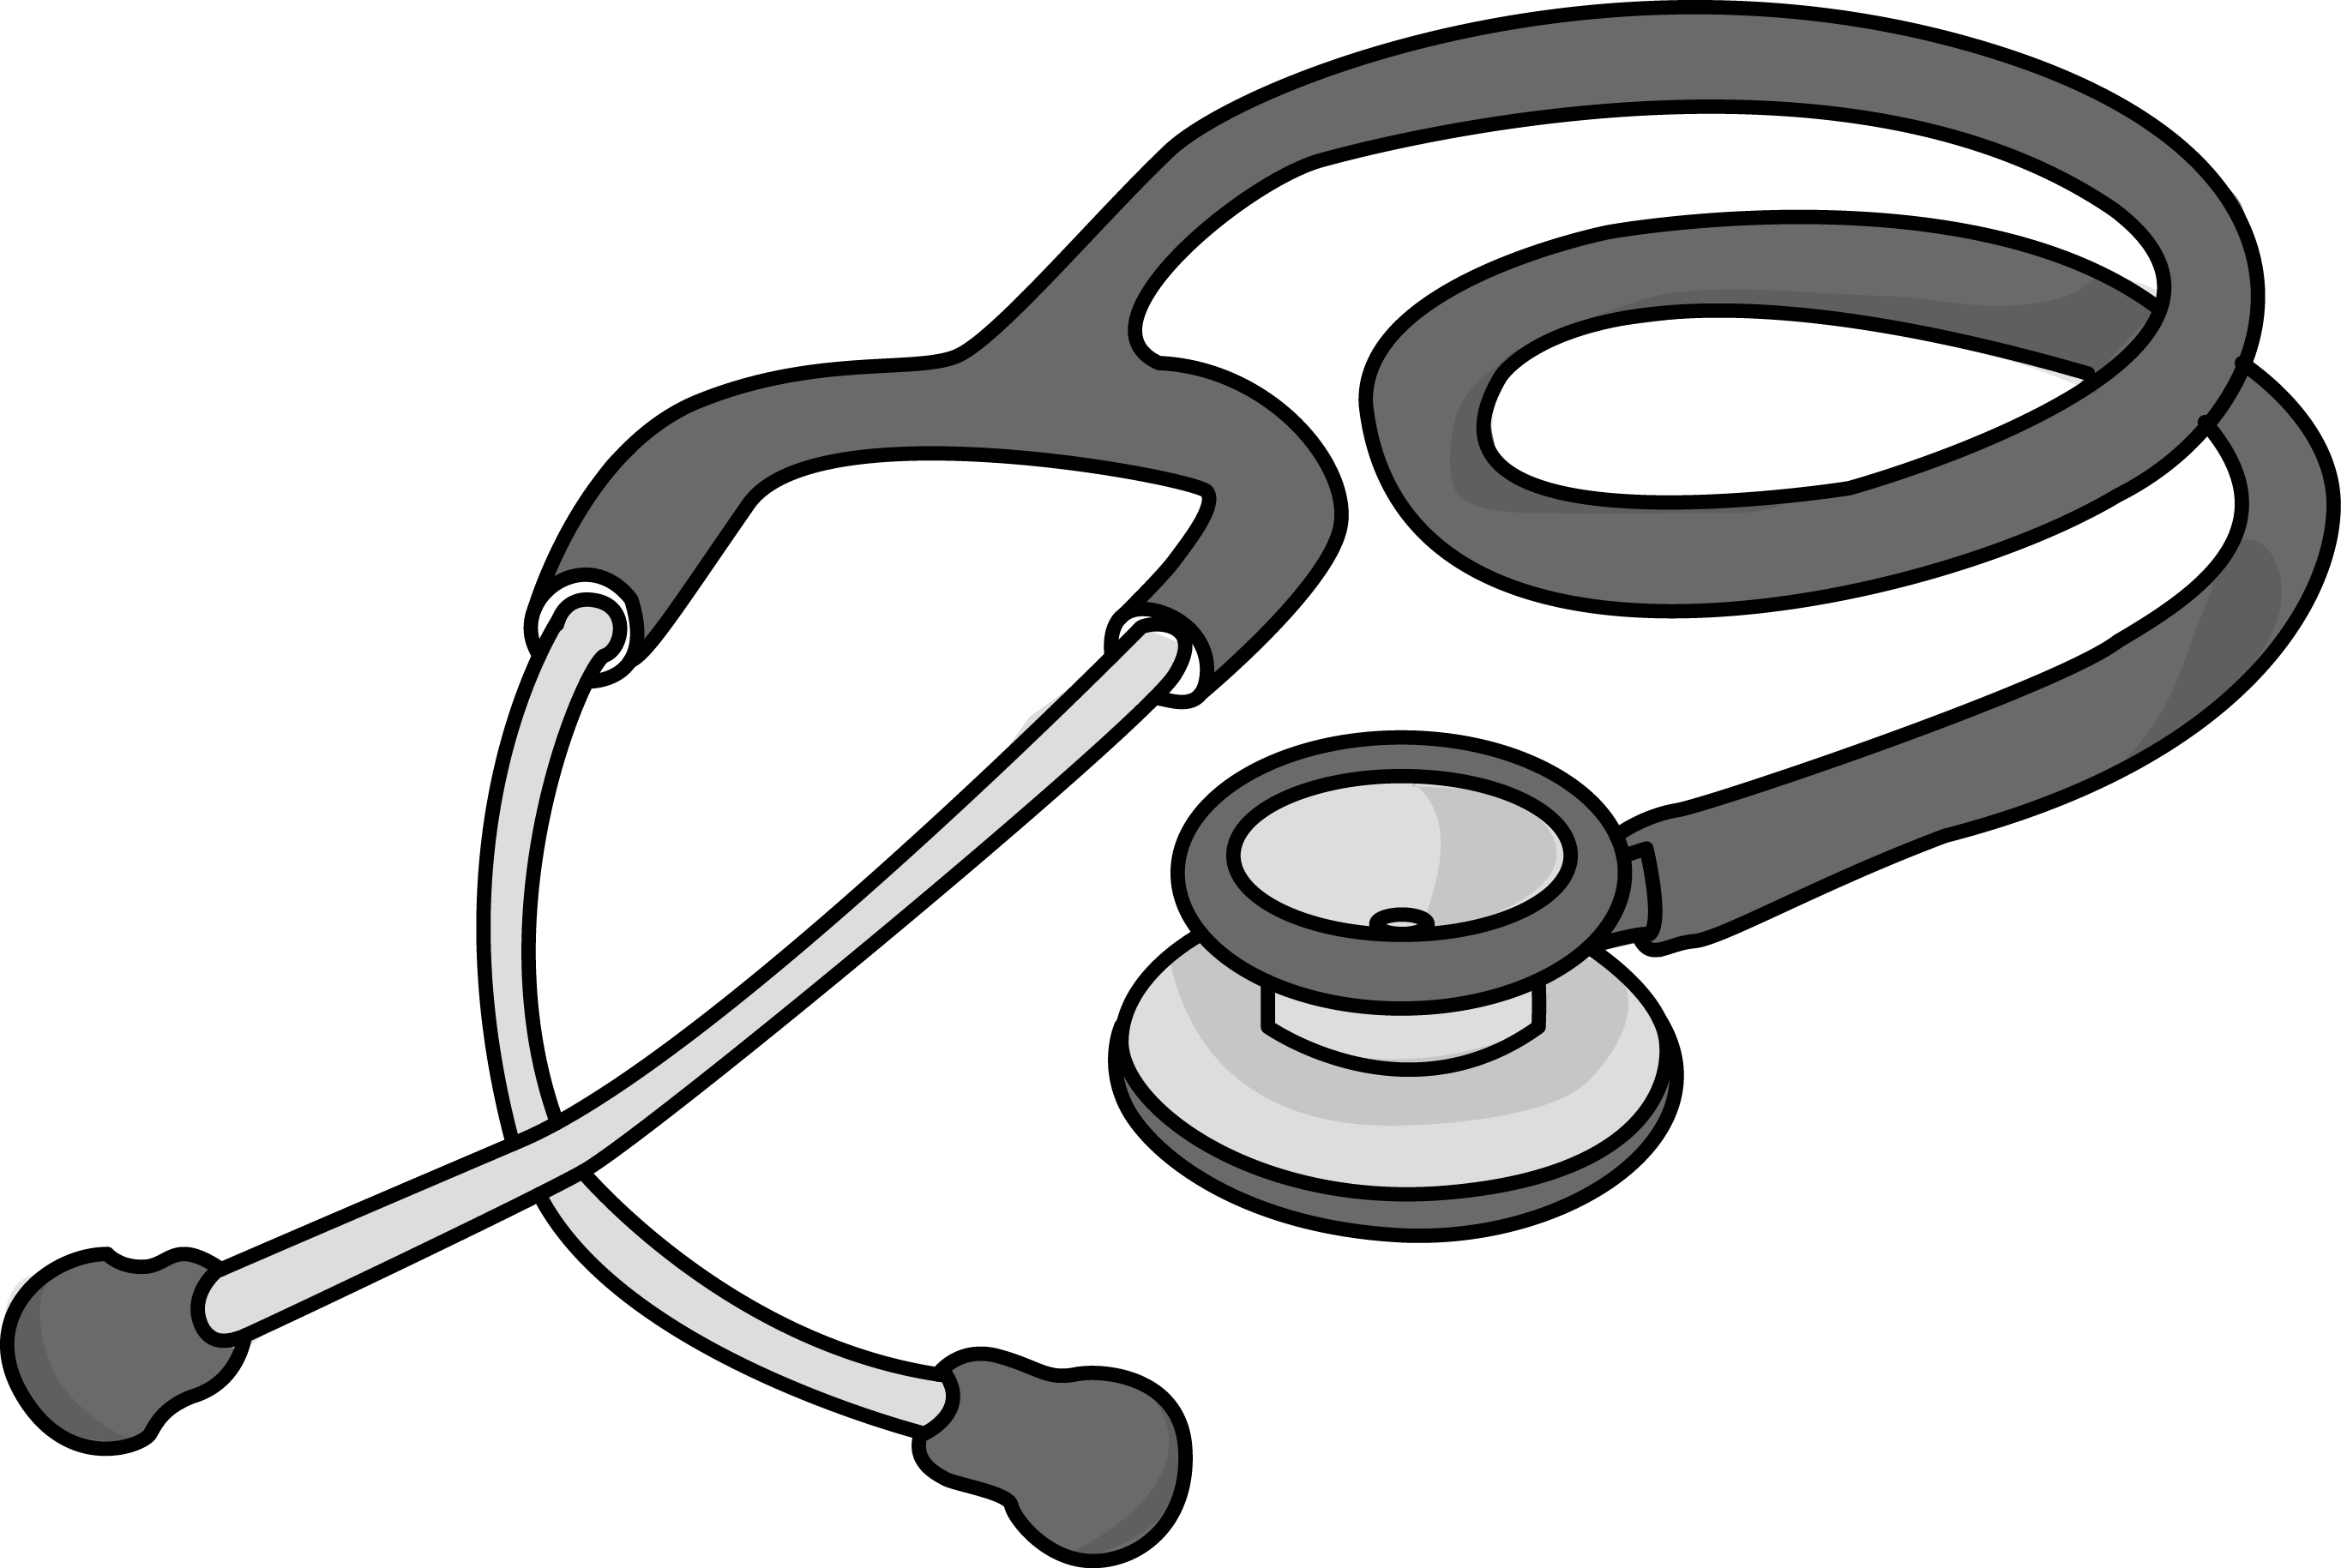  collection of stethoscope. Medication clipart betadine